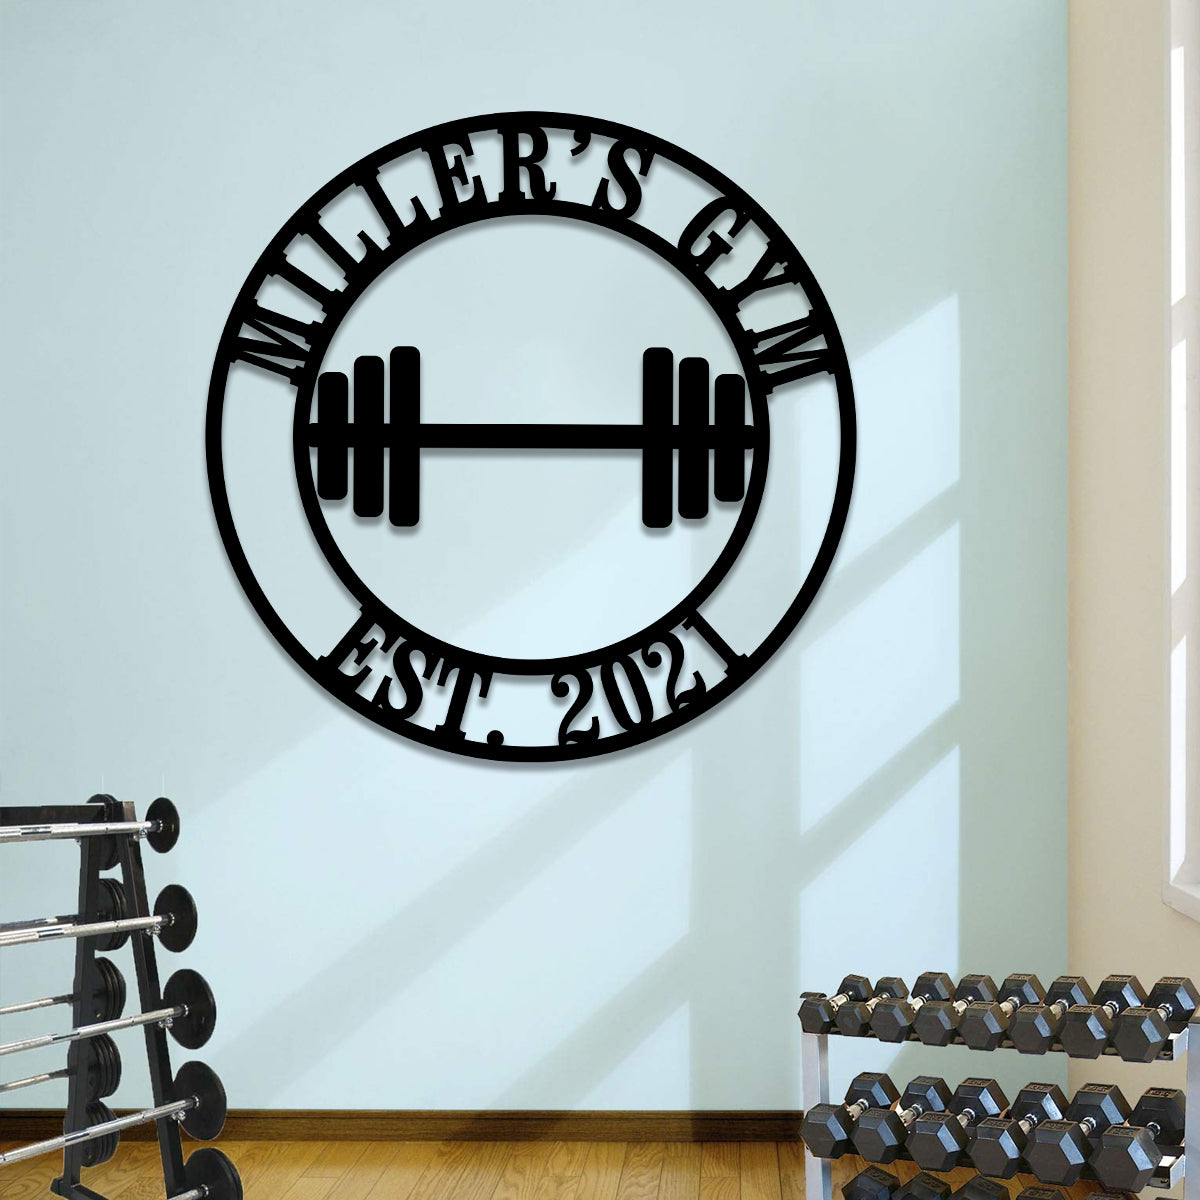 Personalized Metal Gym Sign, Cross Fit Club, Home Wall Decor, Wedding, Anniversary Art Gift